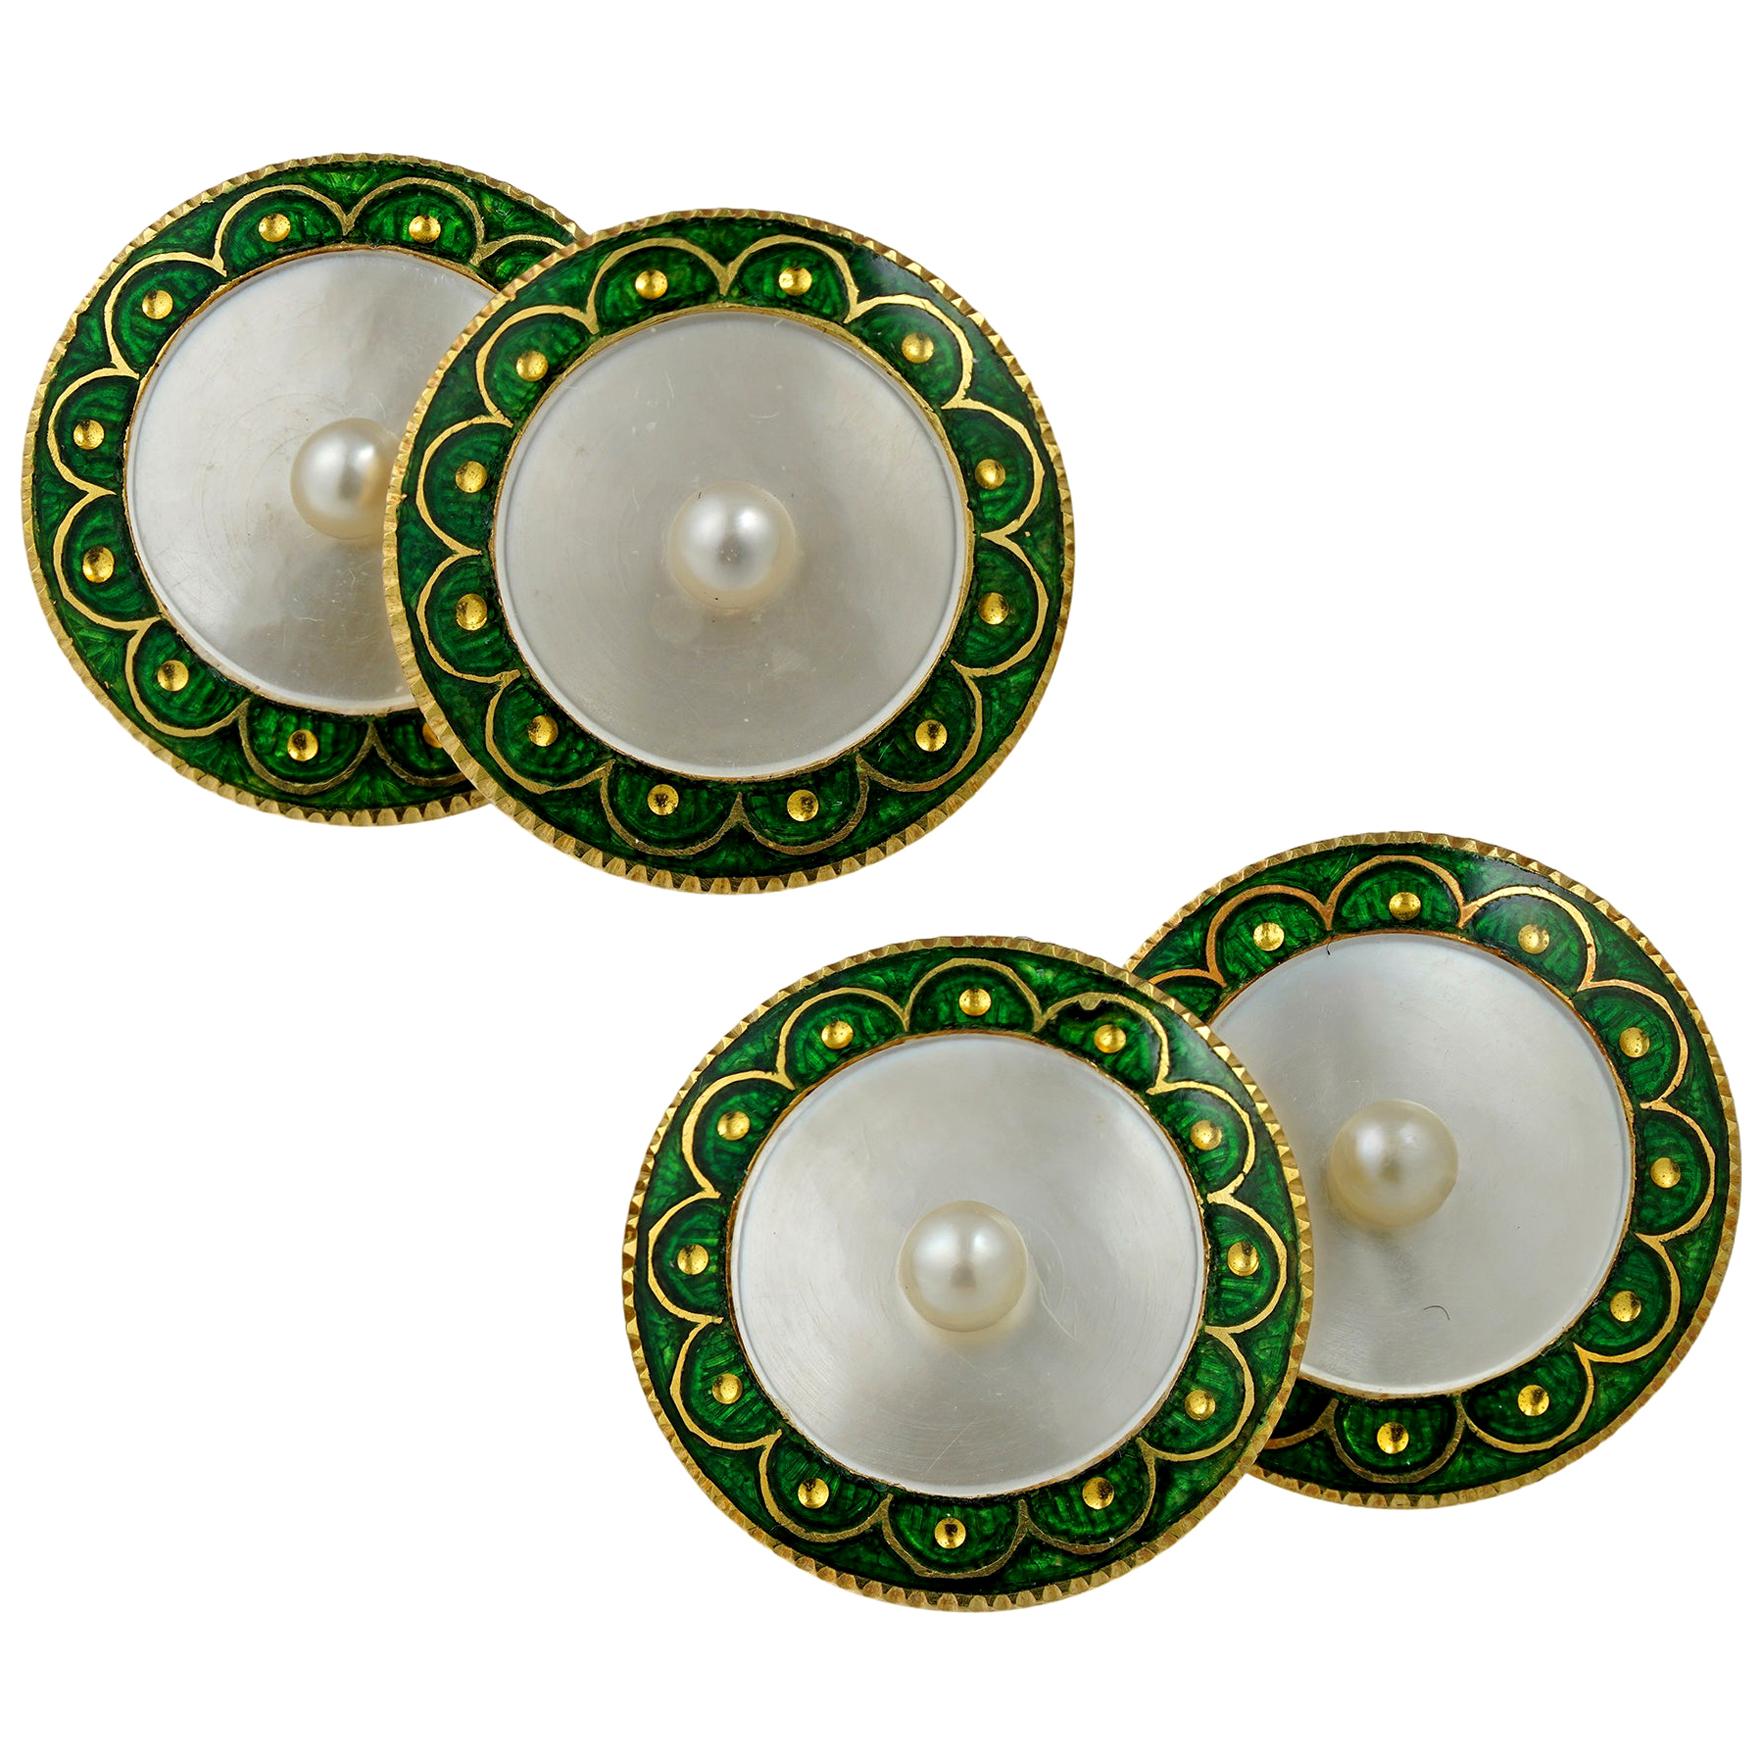 Pair of Edwardian Mother of Pearl and Enamel Cufflinks